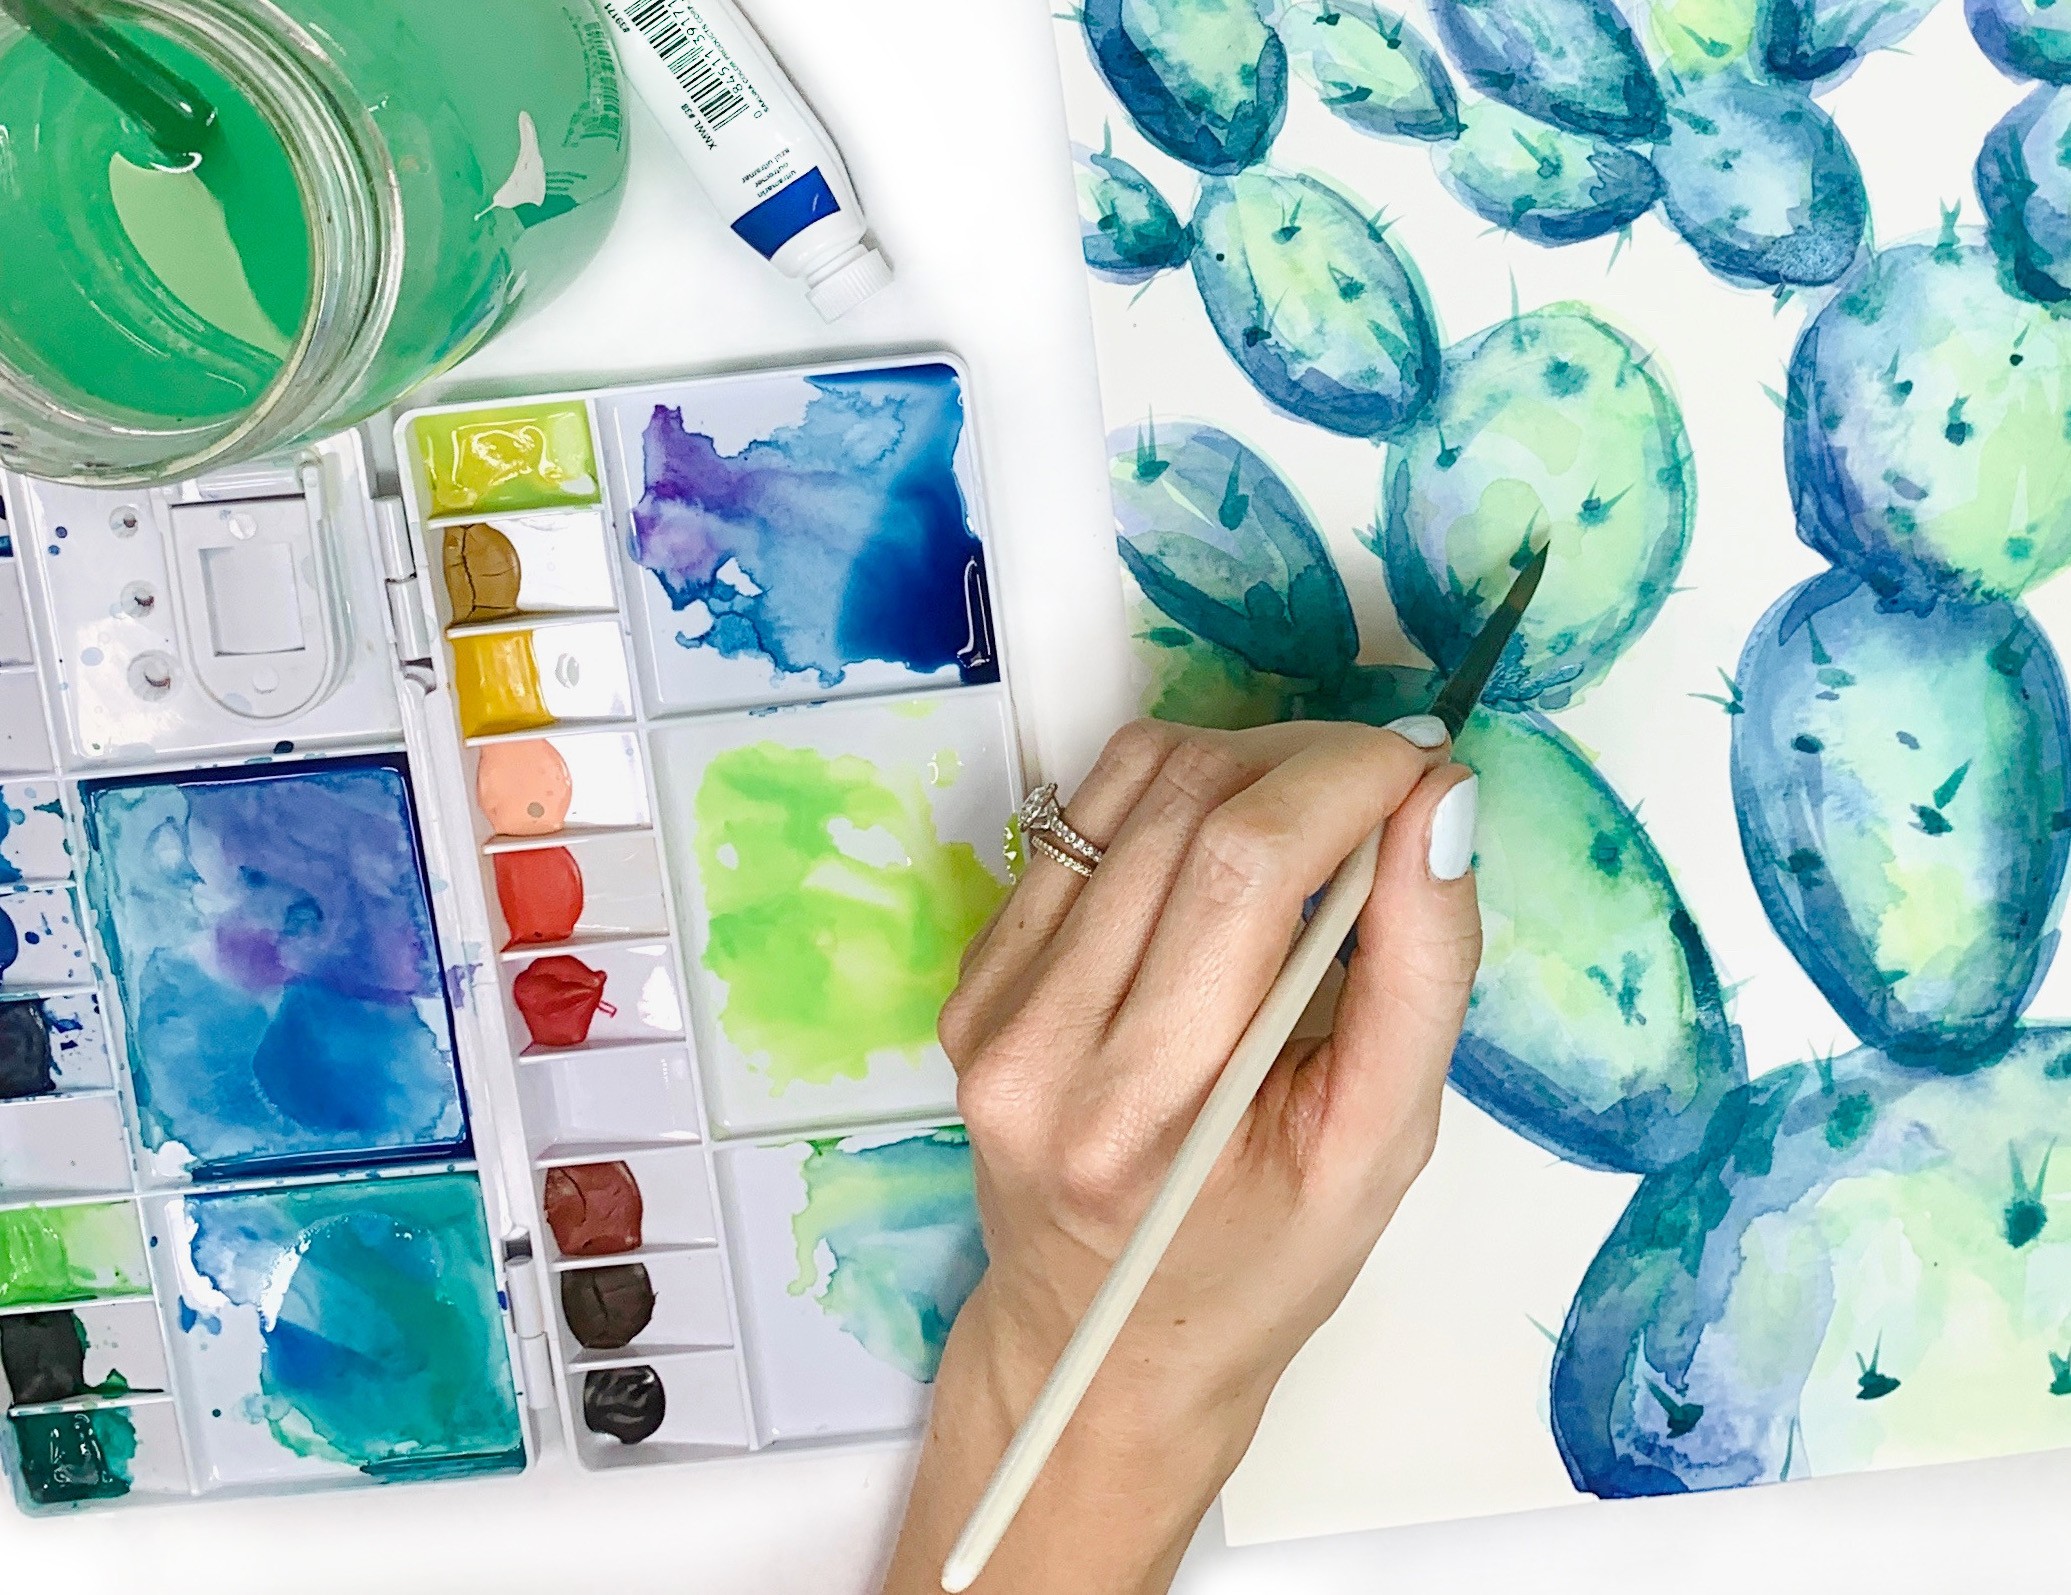 8 of the Best Online Art Classes for Creative Moms